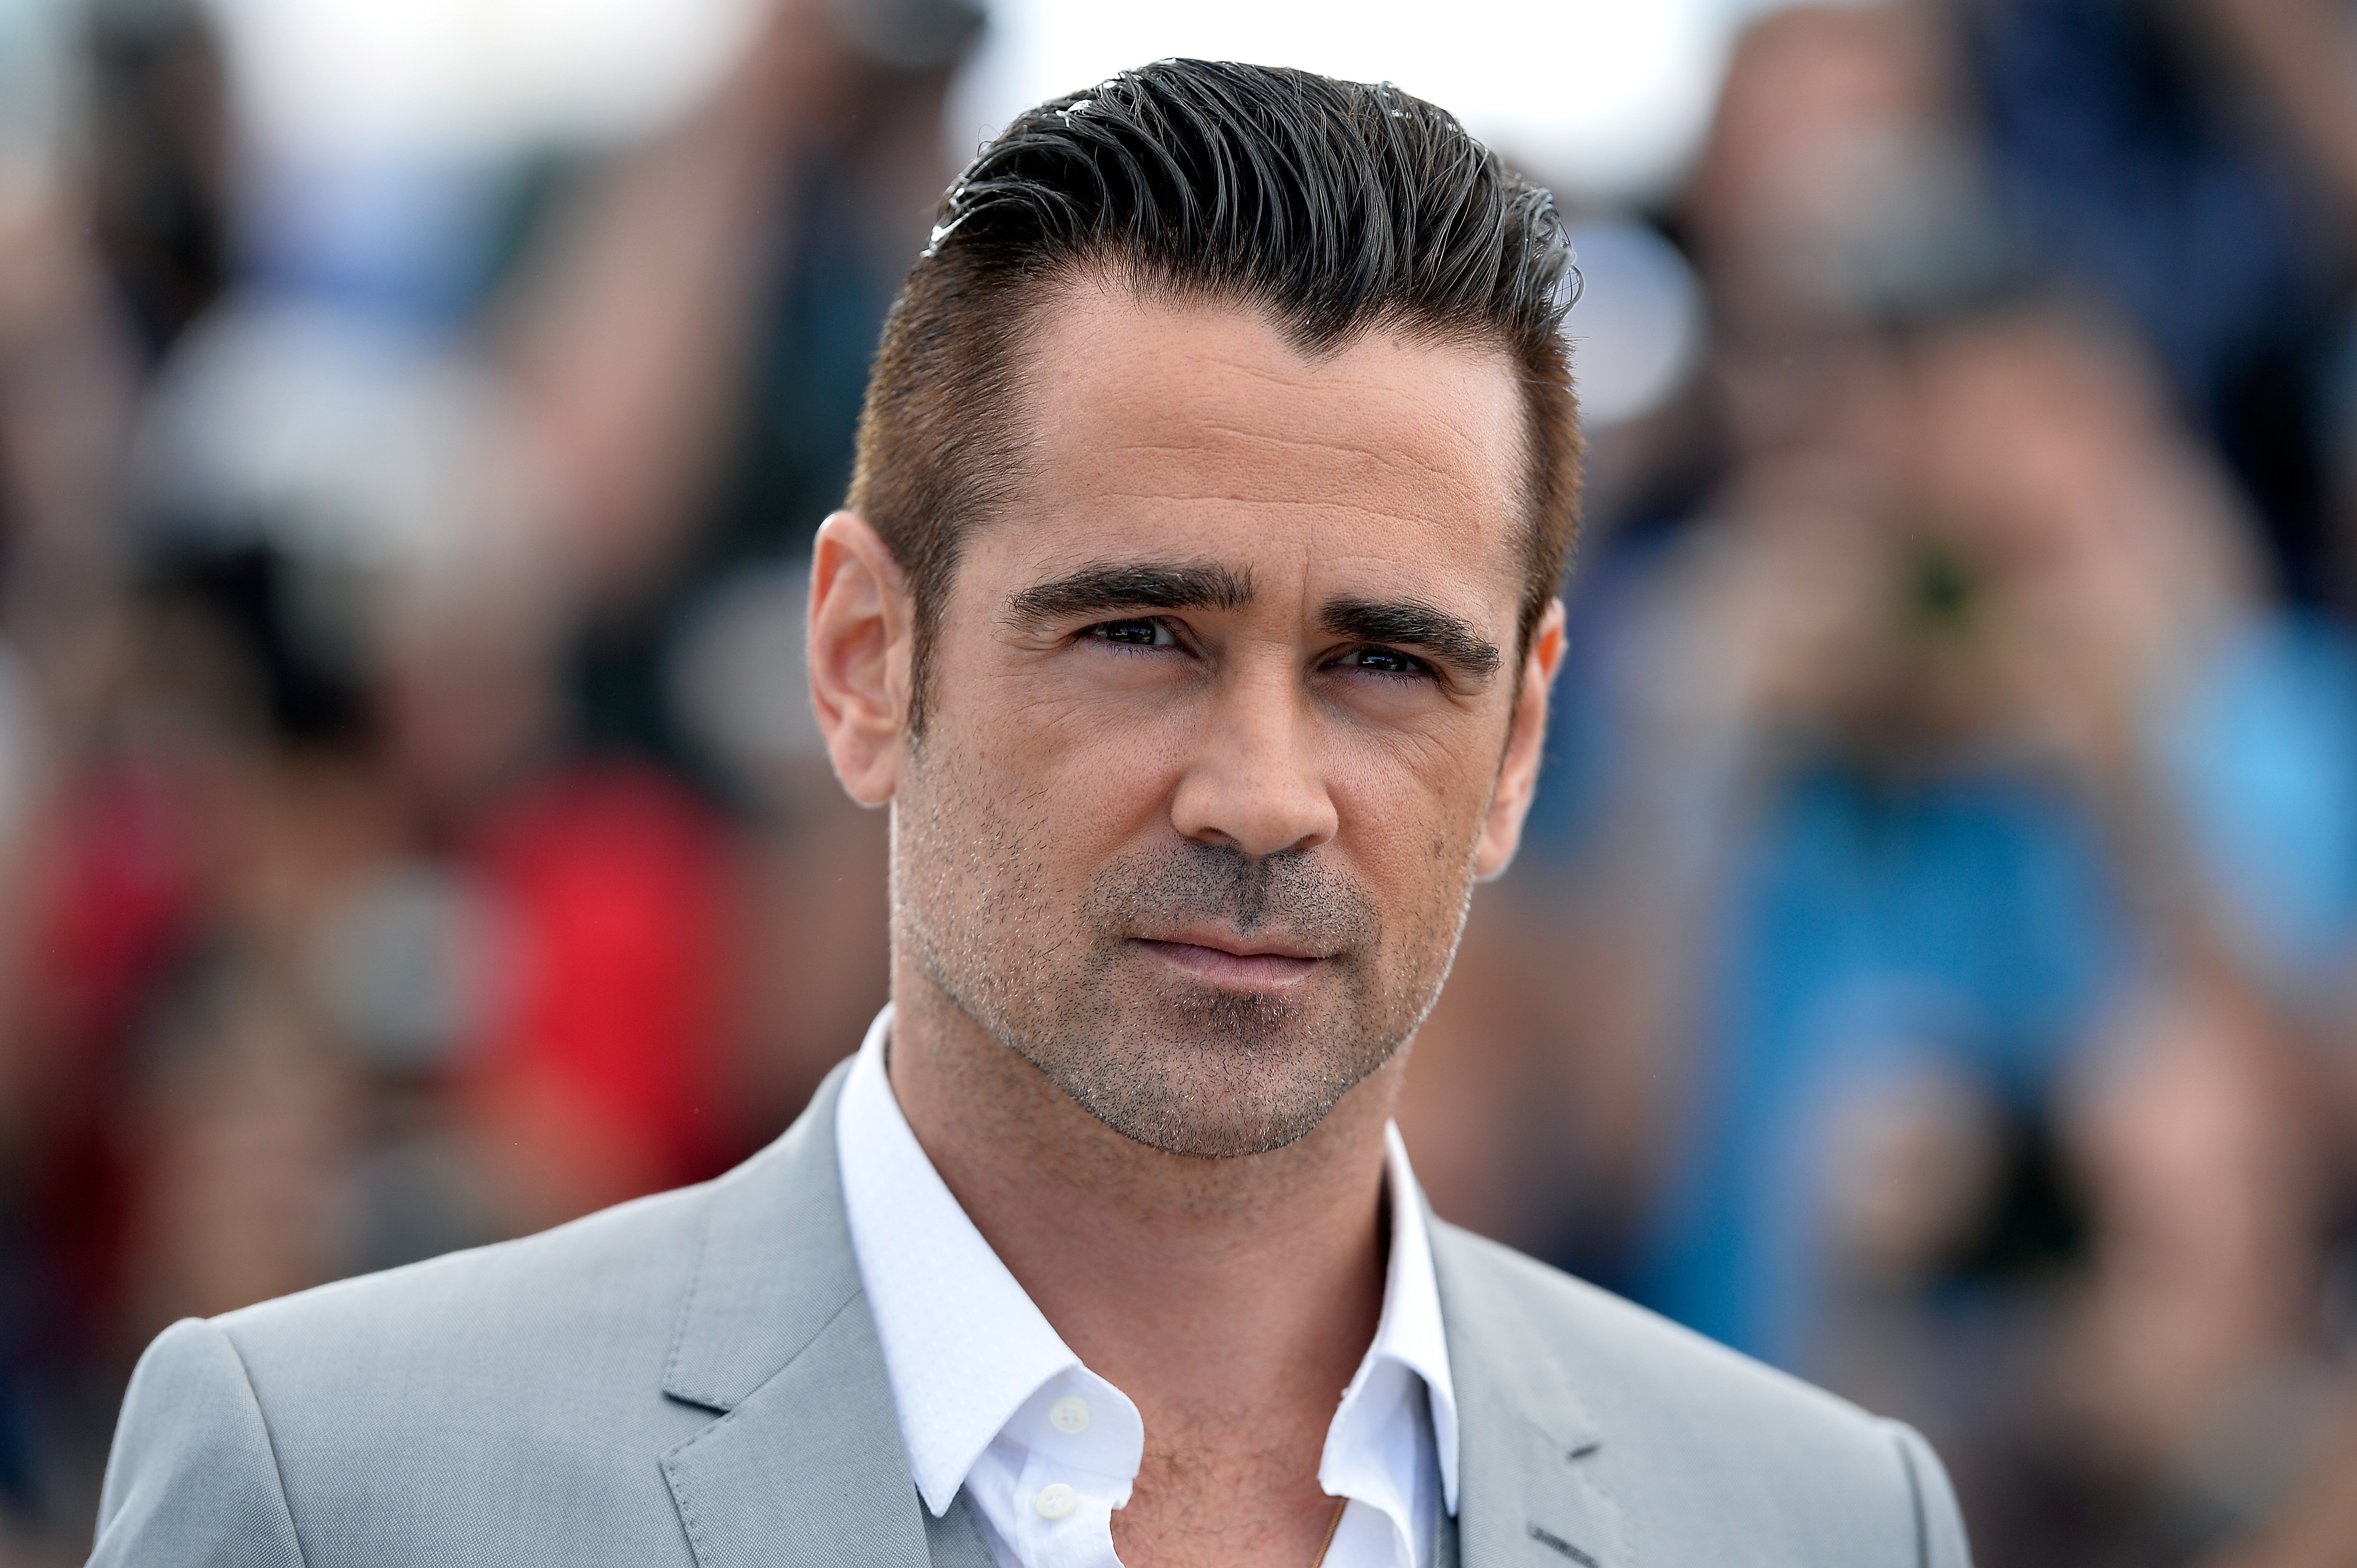 Colin Farrell at a photocall for "The Lobster" during the 68th annual Cannes Film Festival on May 15, 2015, in Cannes, France | Source: Getty Images